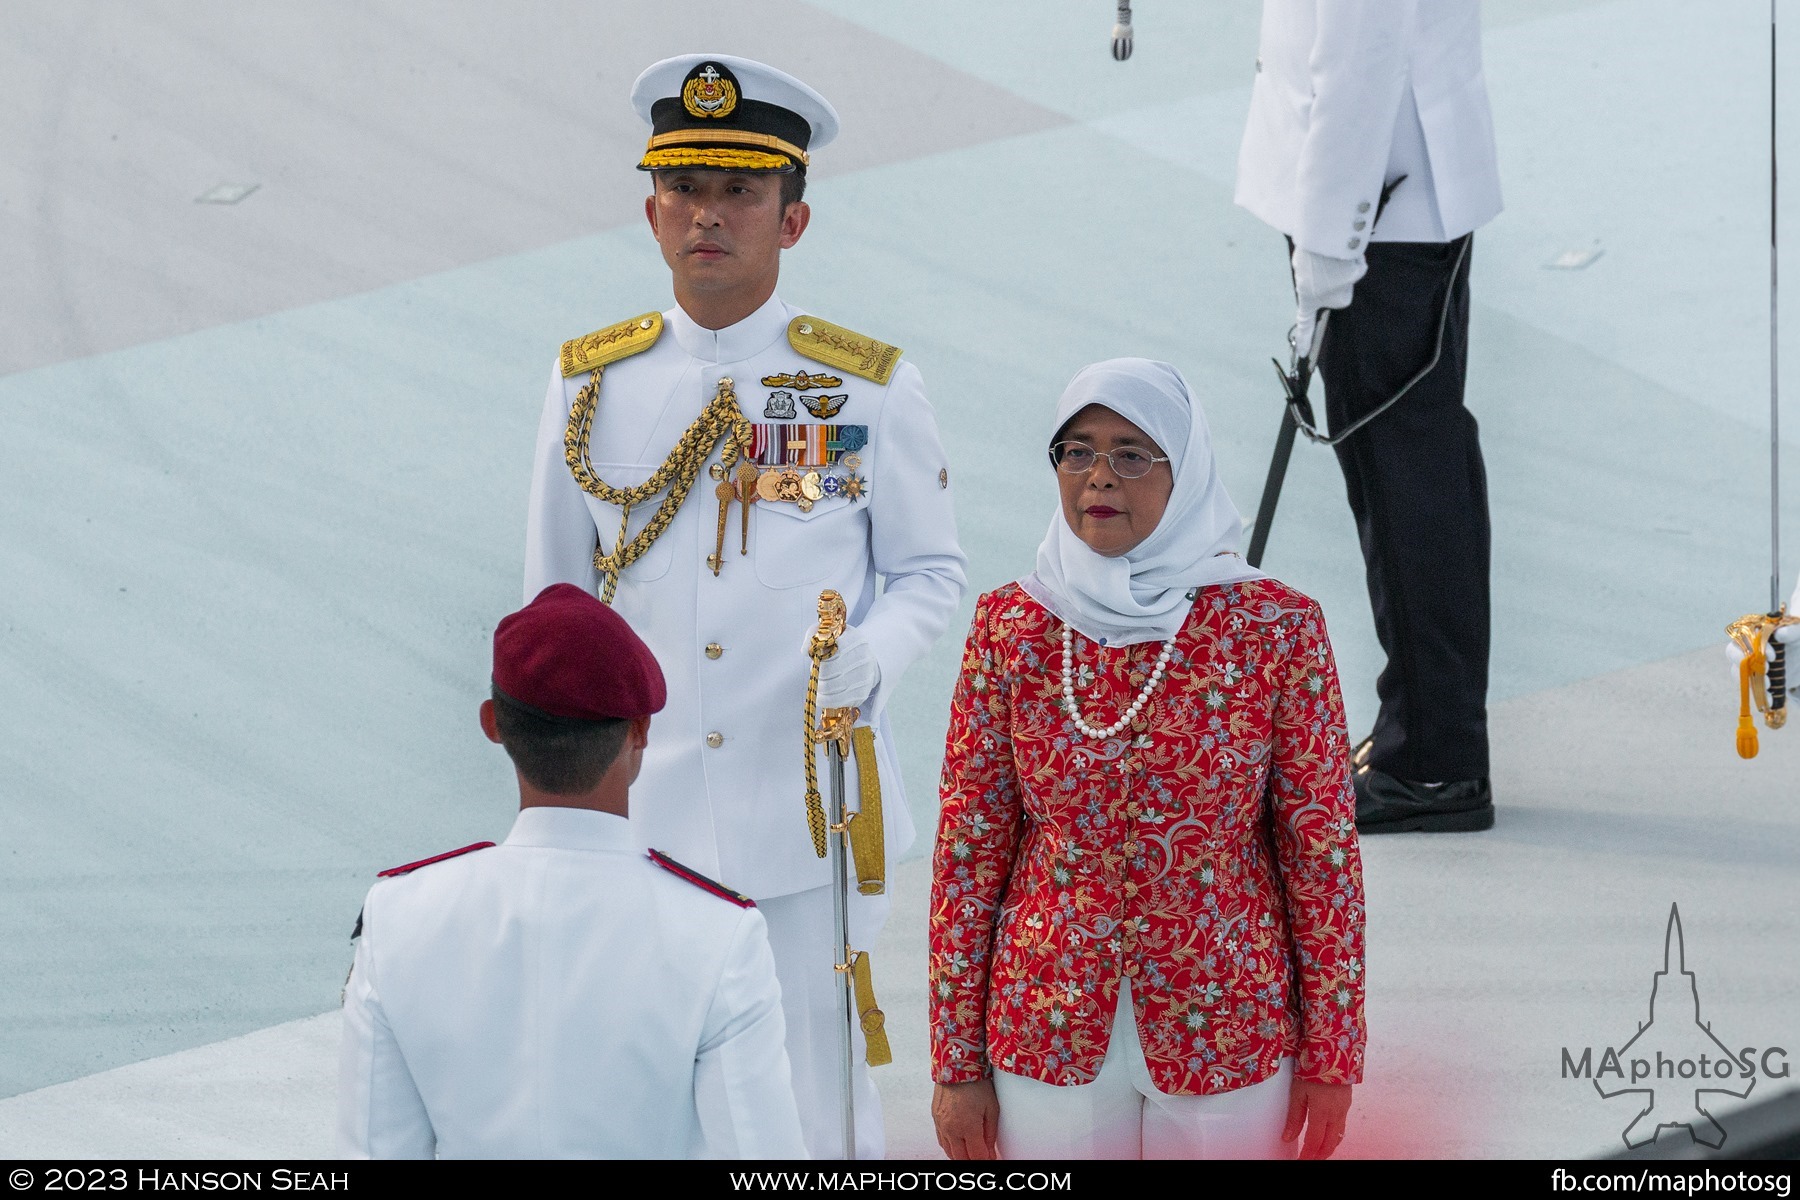 President of SIngapore, Mdm Halimah Yacob, finishes the inspection of the Guard-of-Honour.